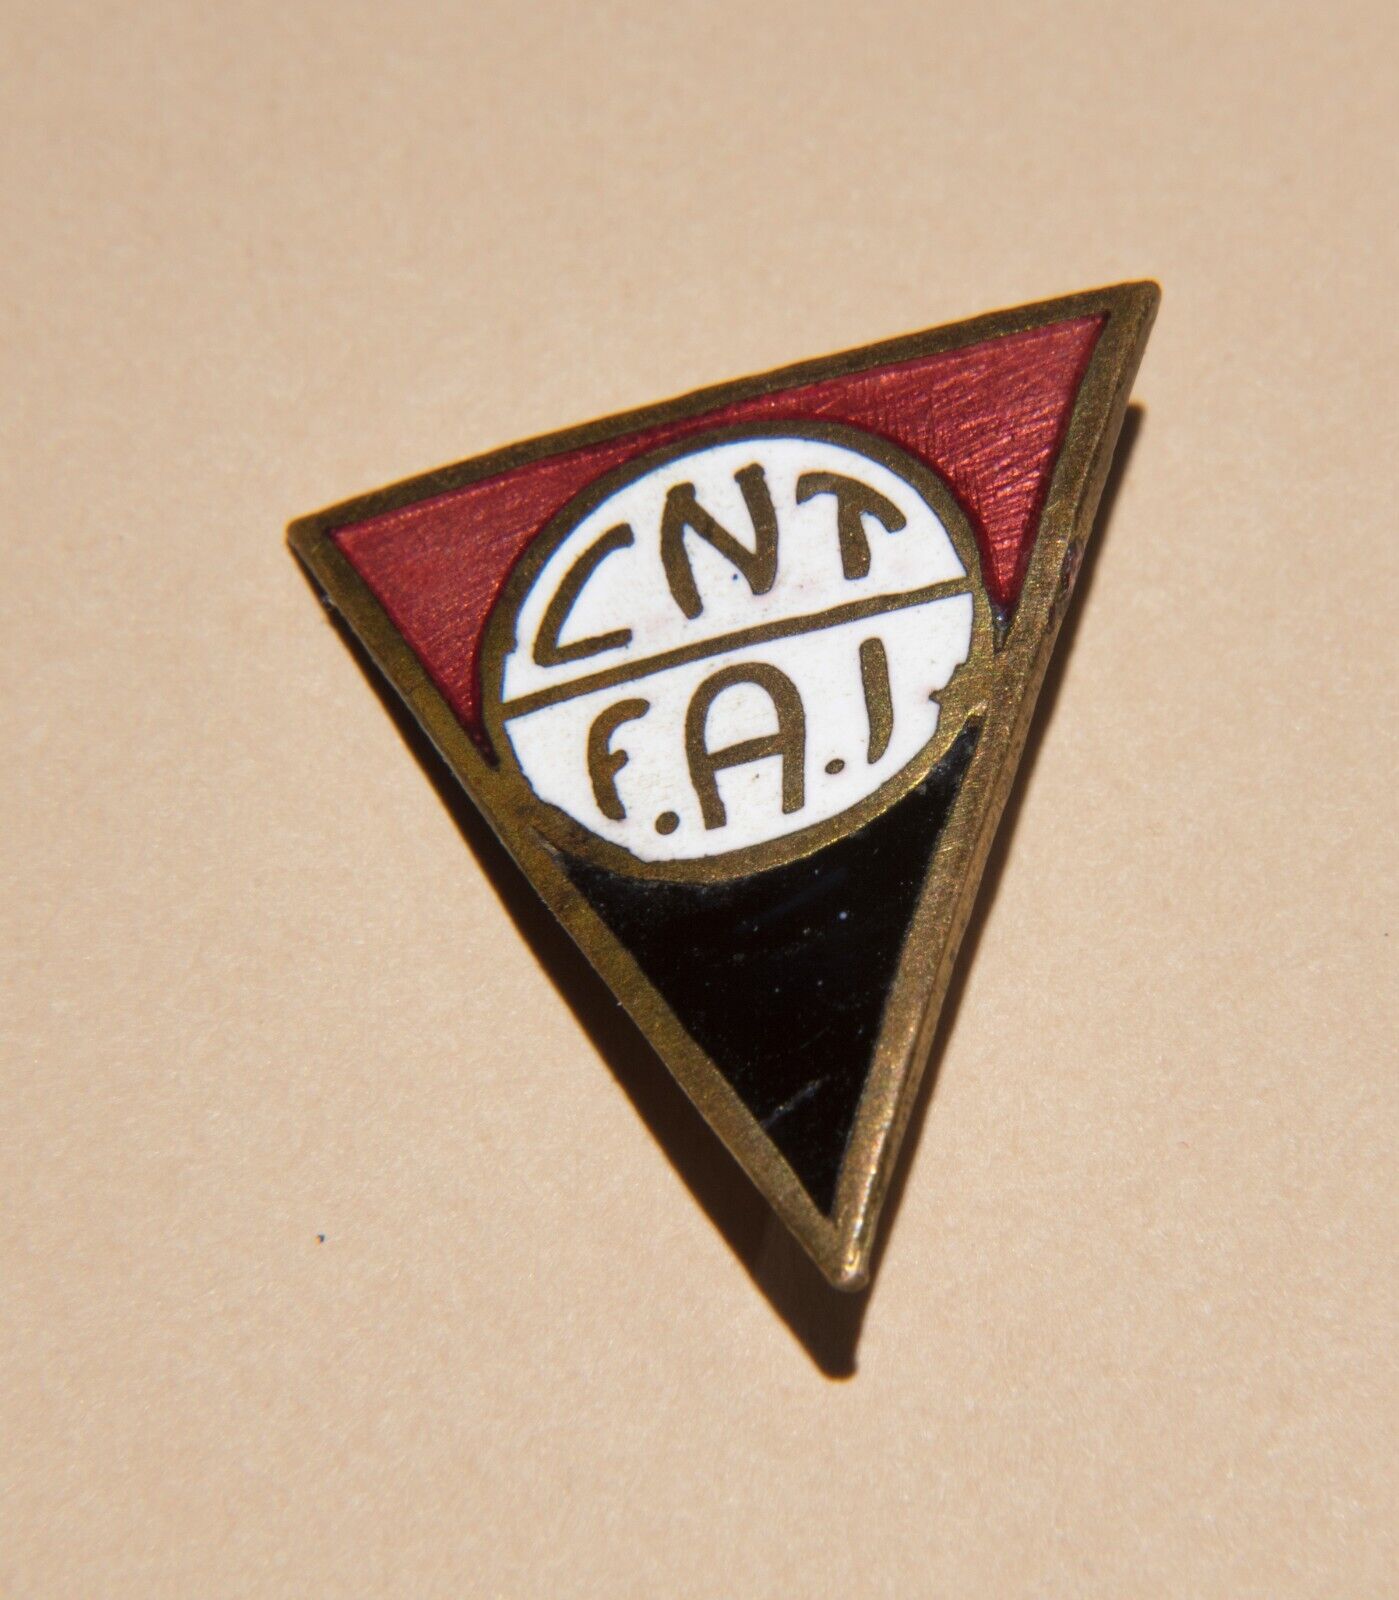 CNT F.A.I. pin, Enamel MINT Condition, Rare, Vintage NOT A REPRODUCTION